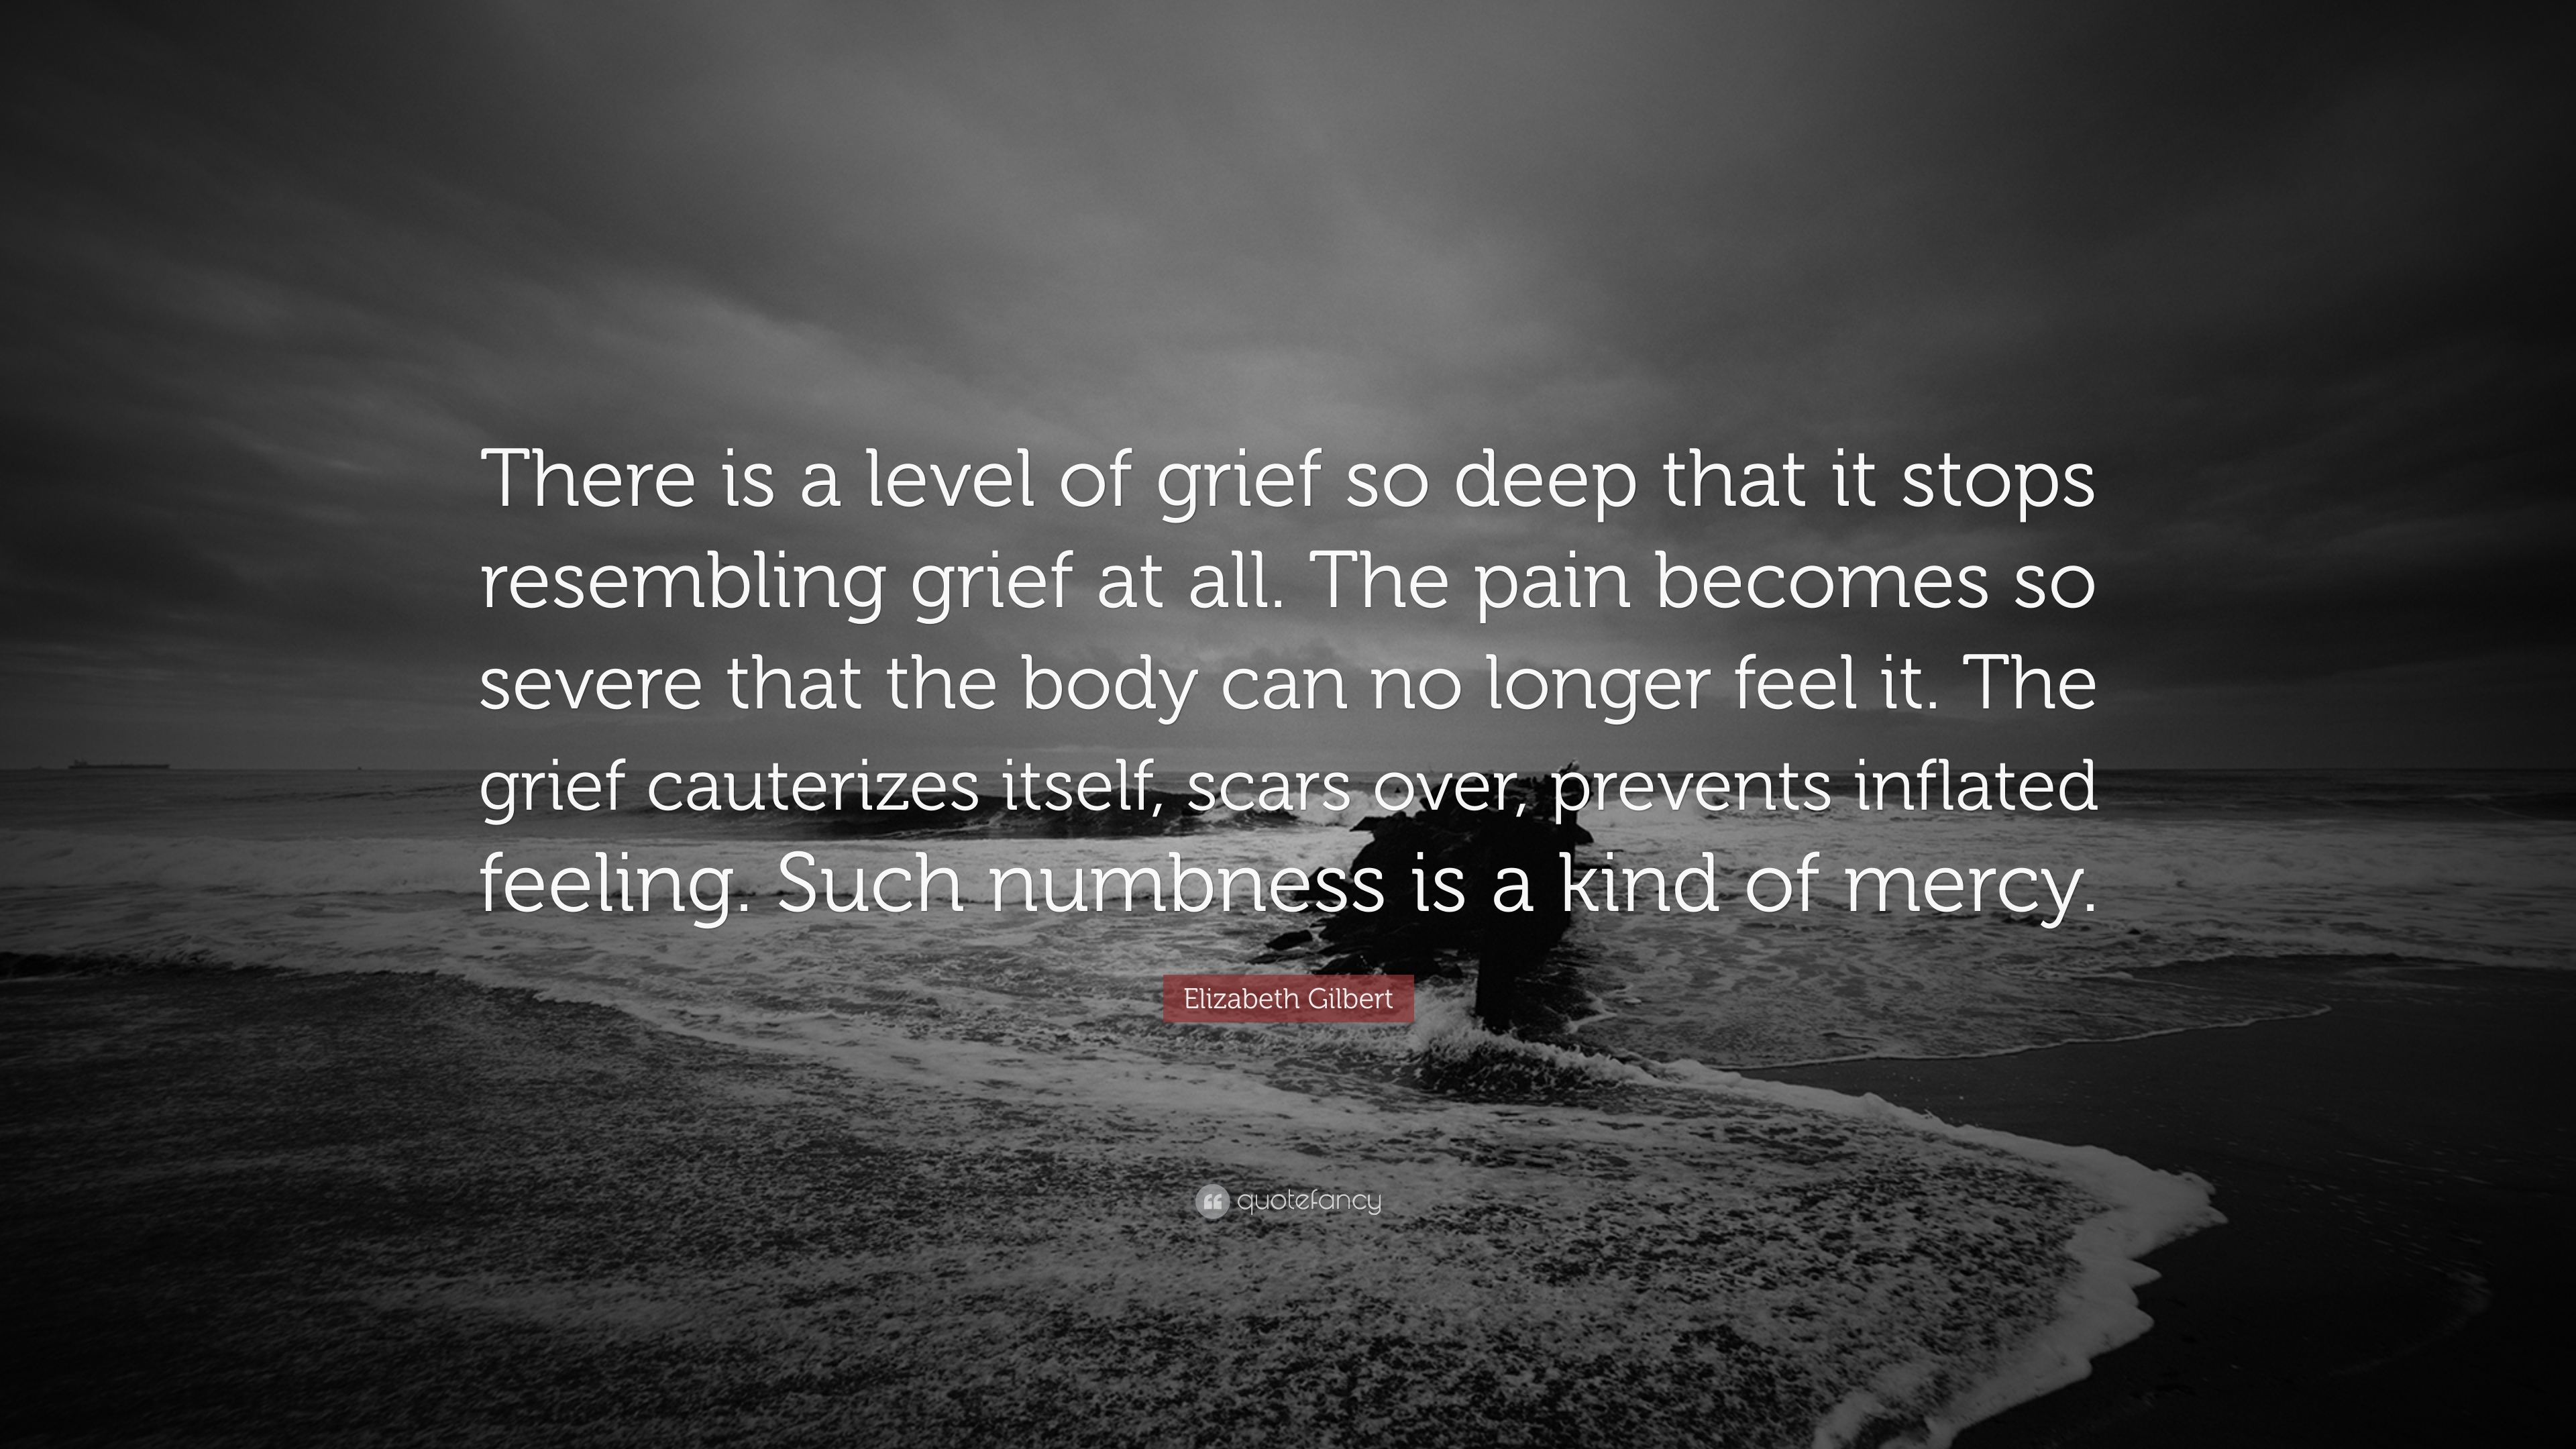 Elizabeth Gilbert Quote: “There is a level of grief so deep